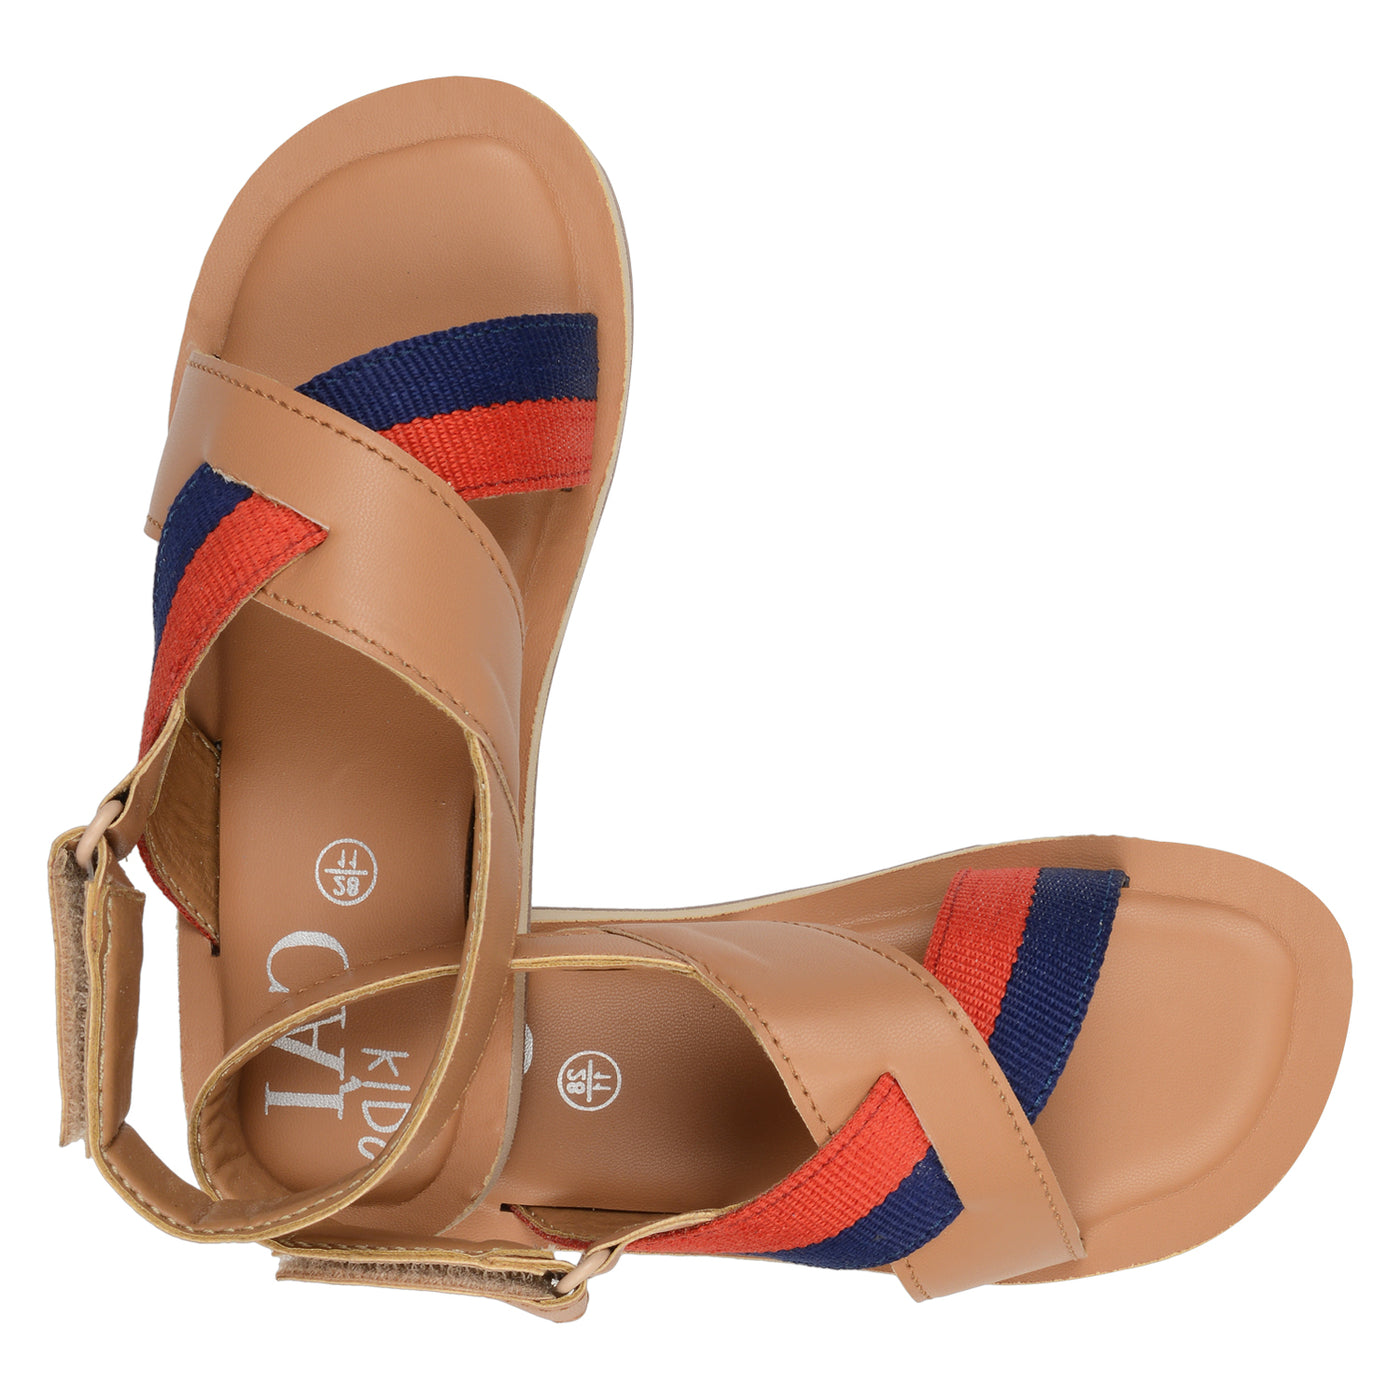 Ochre Across Kito Sandals for Ladies